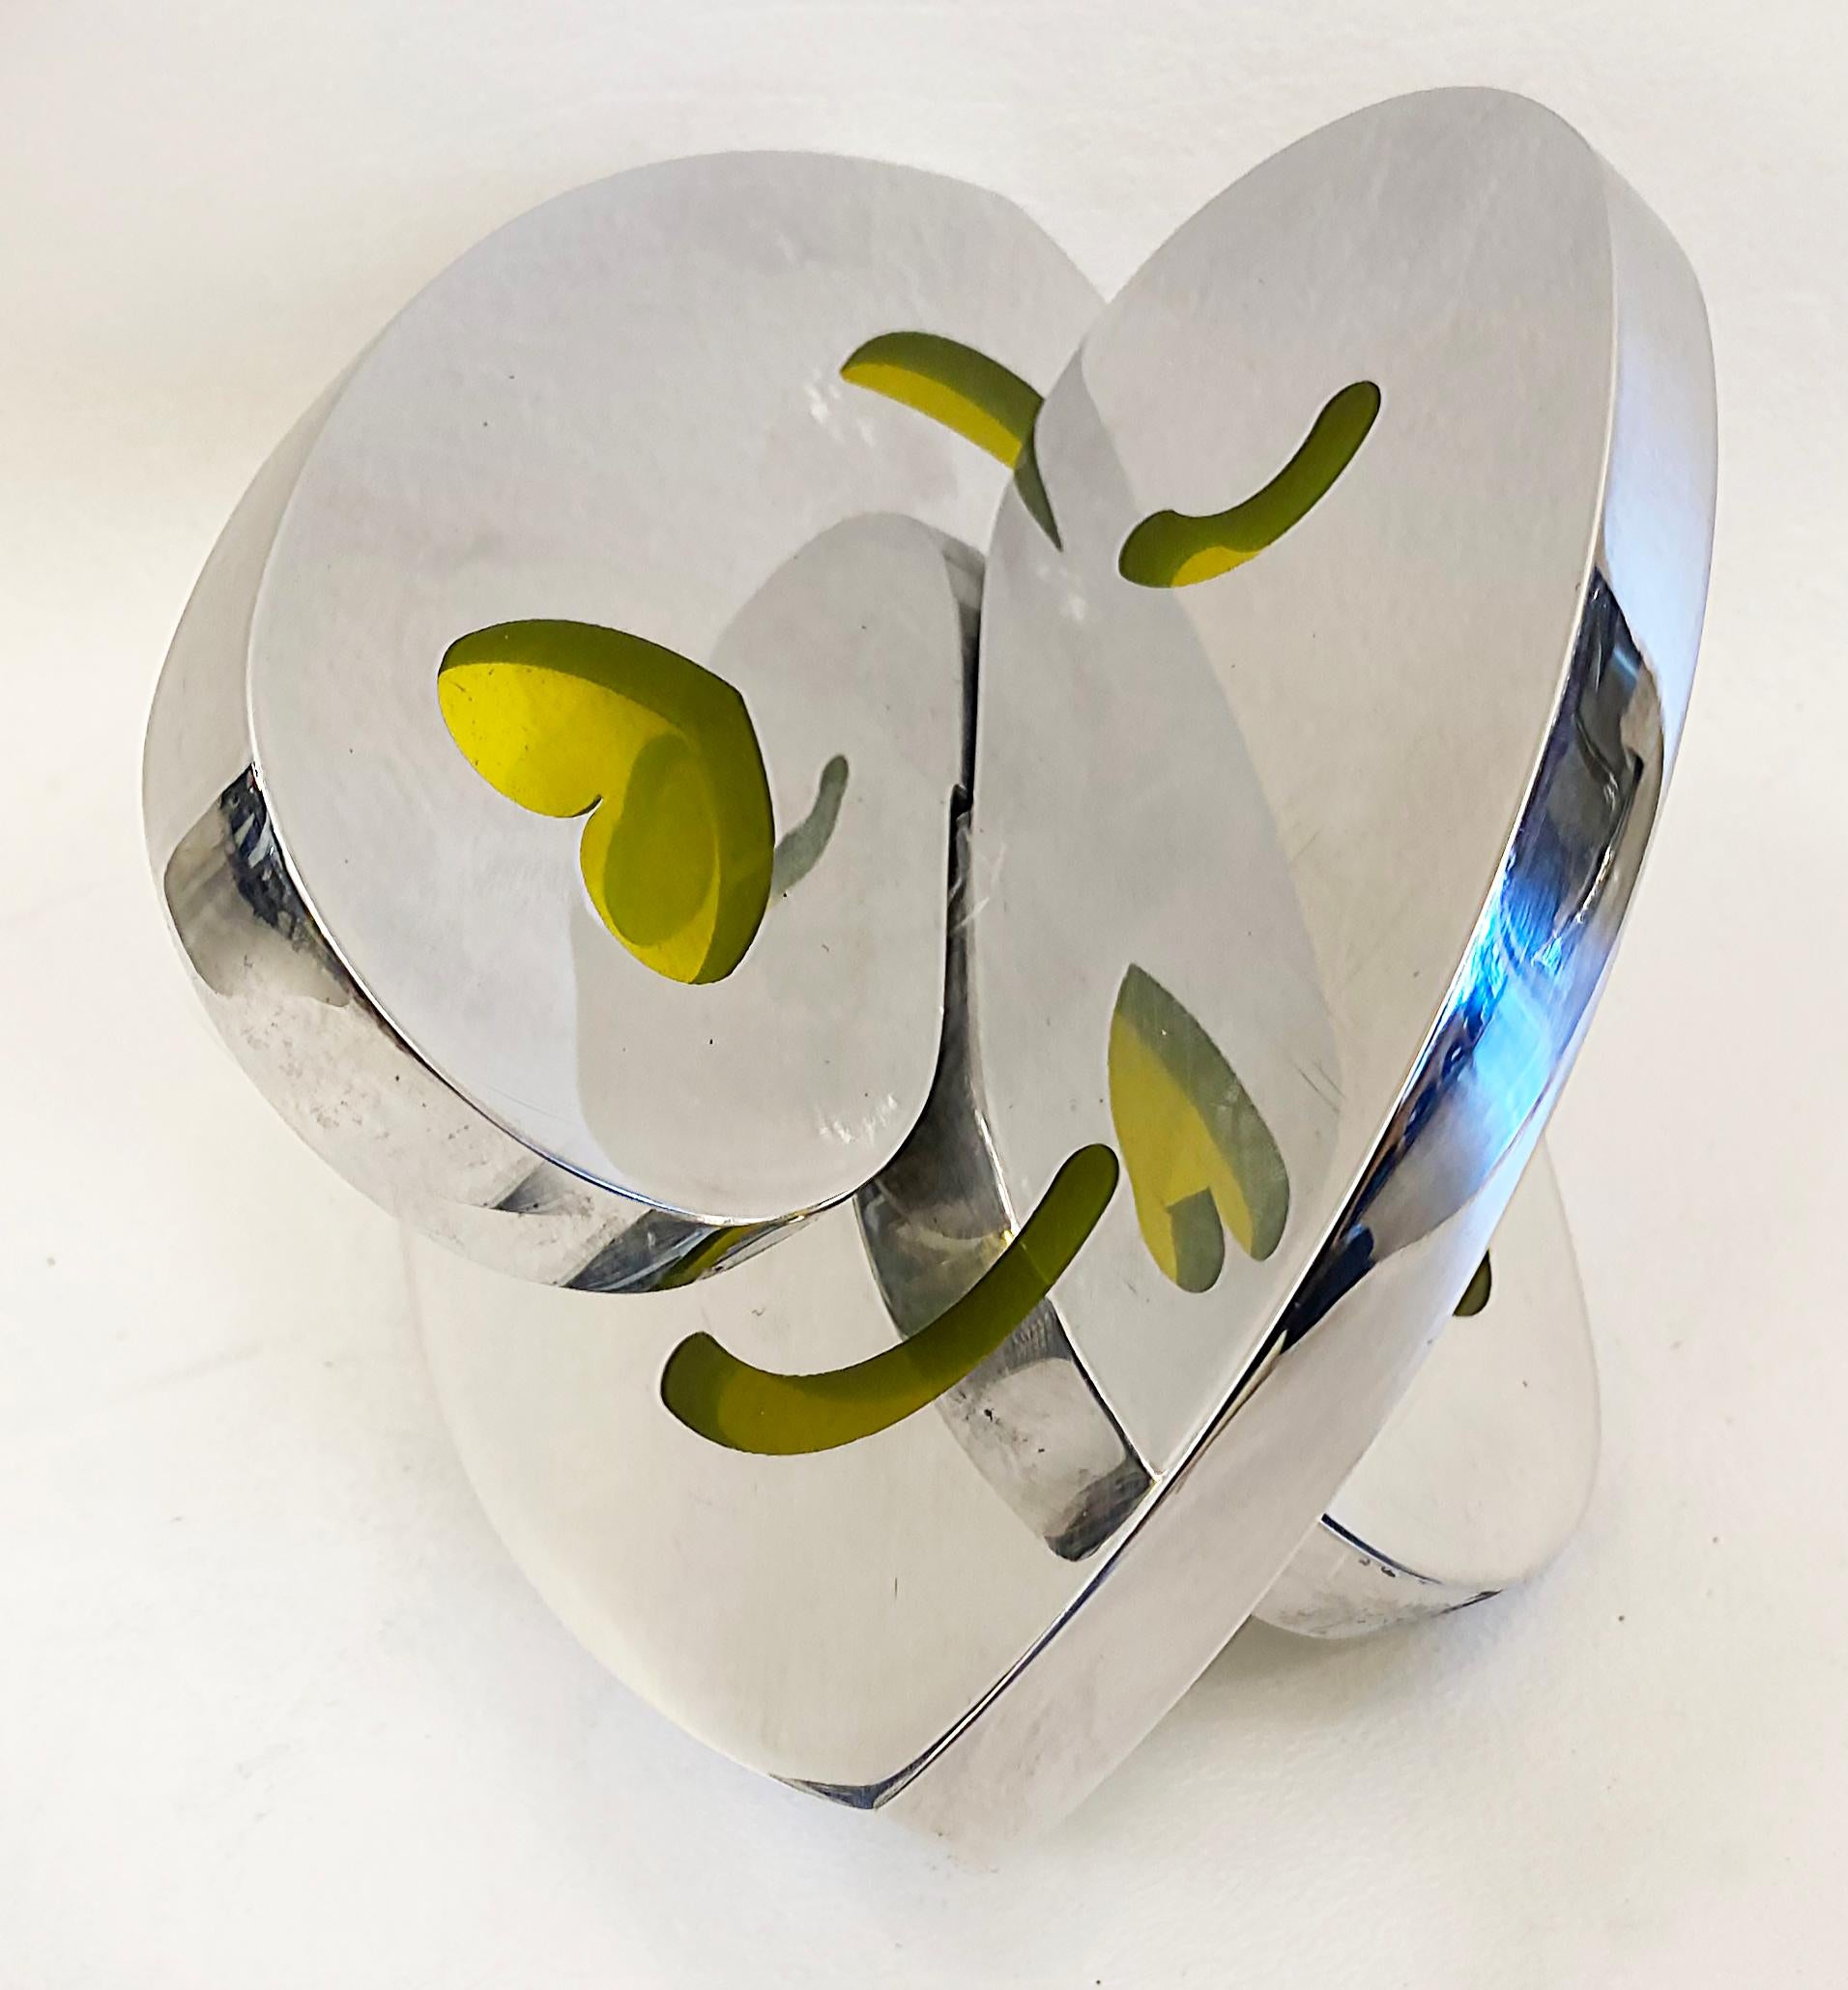 Contemporary Polished Aluminum, Resin Interlocking Hearts Sculpture by Michael Gitter For Sale